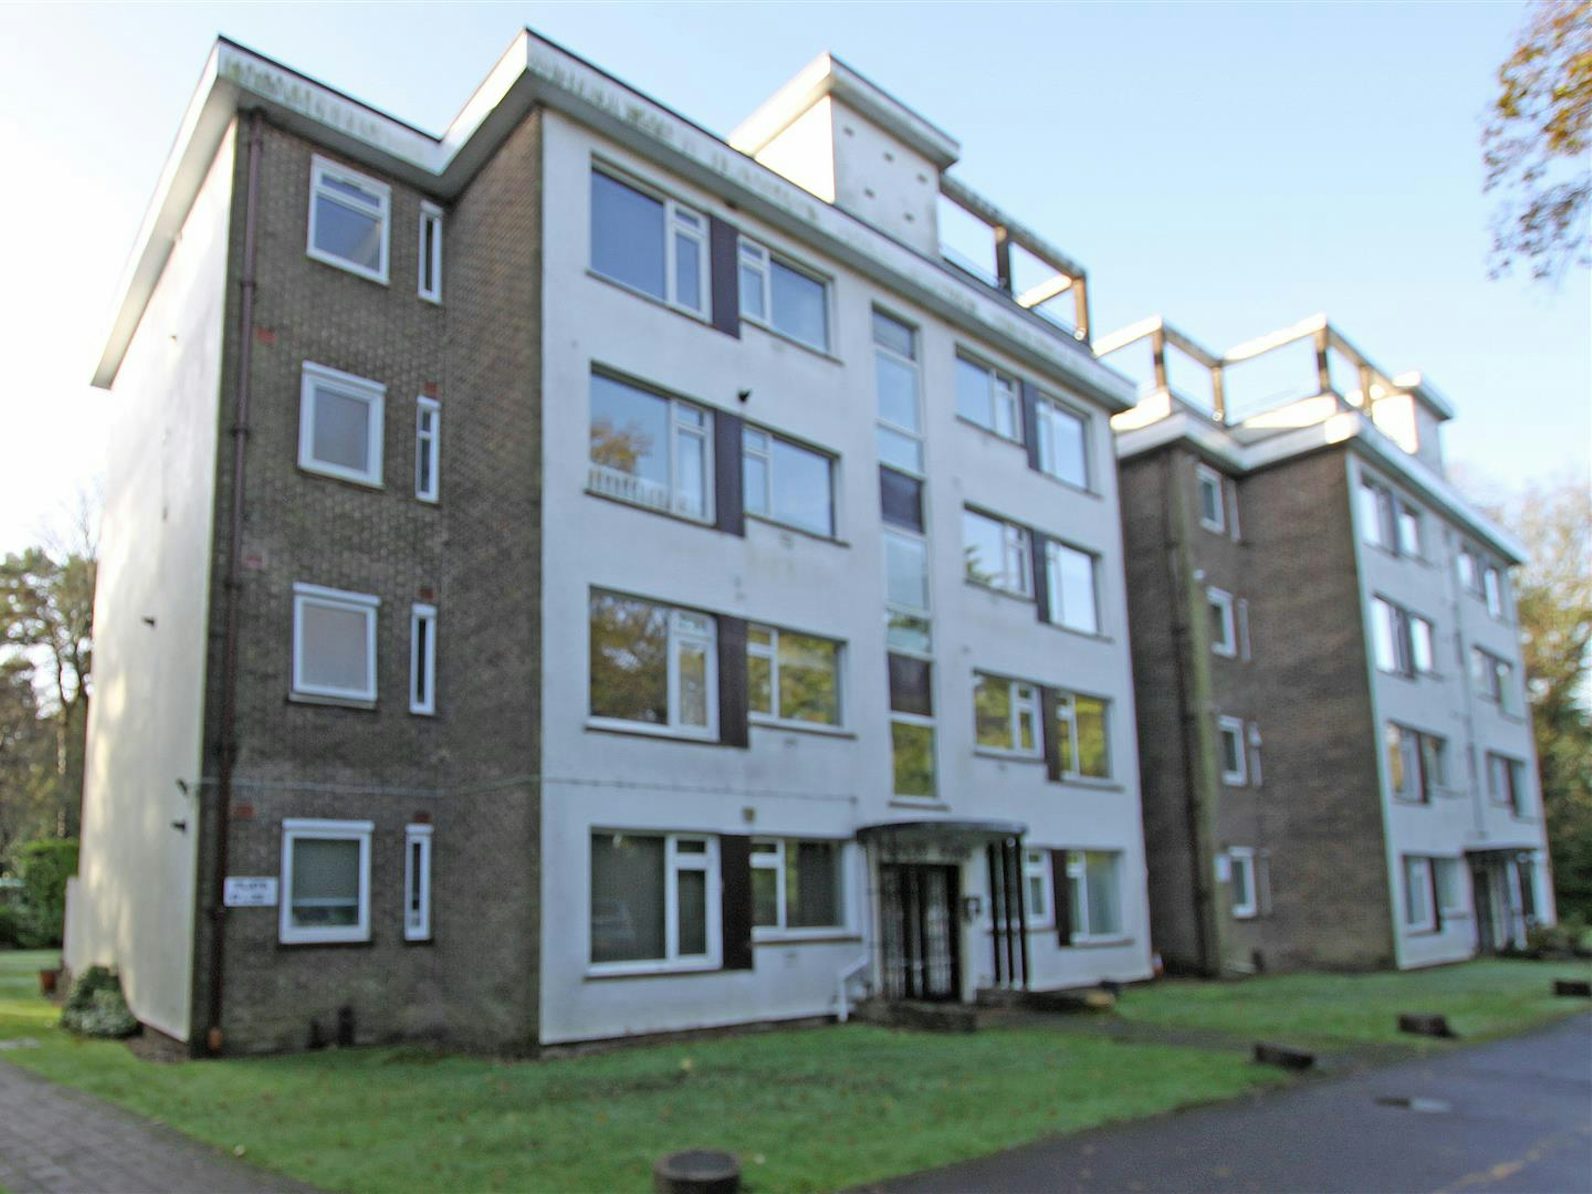 Flat for sale on Lindsay Road Branksome Park, Poole, BH13